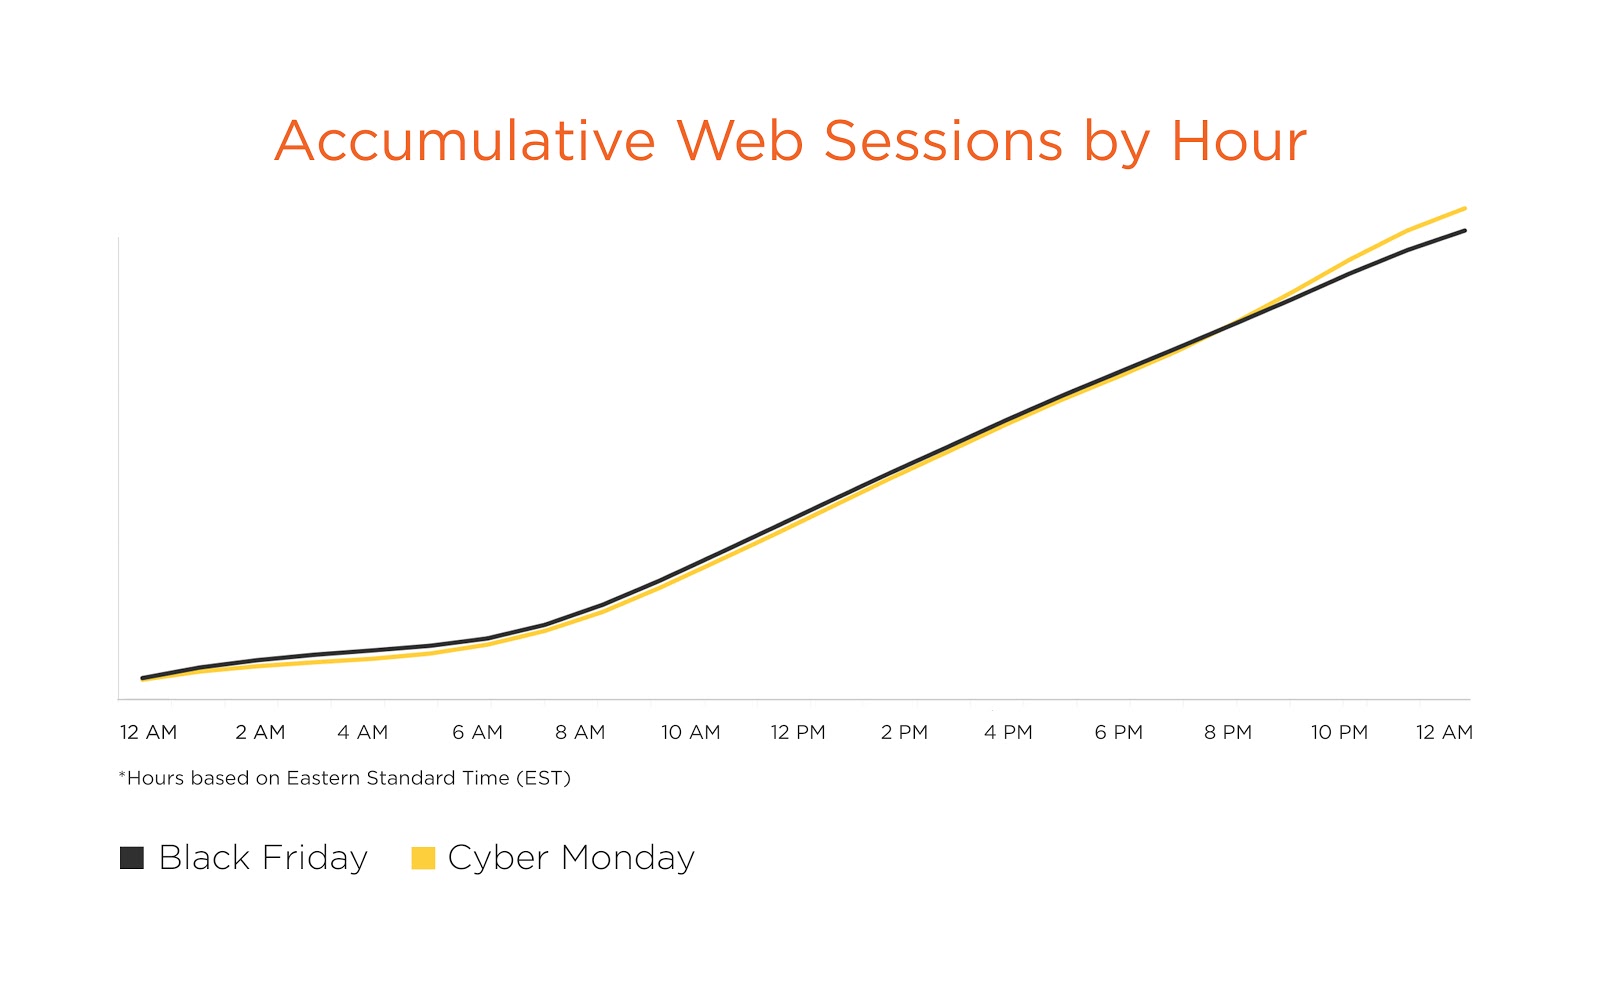 Black Friday and Cyber Monday Accumulative Web Sessions by Hour